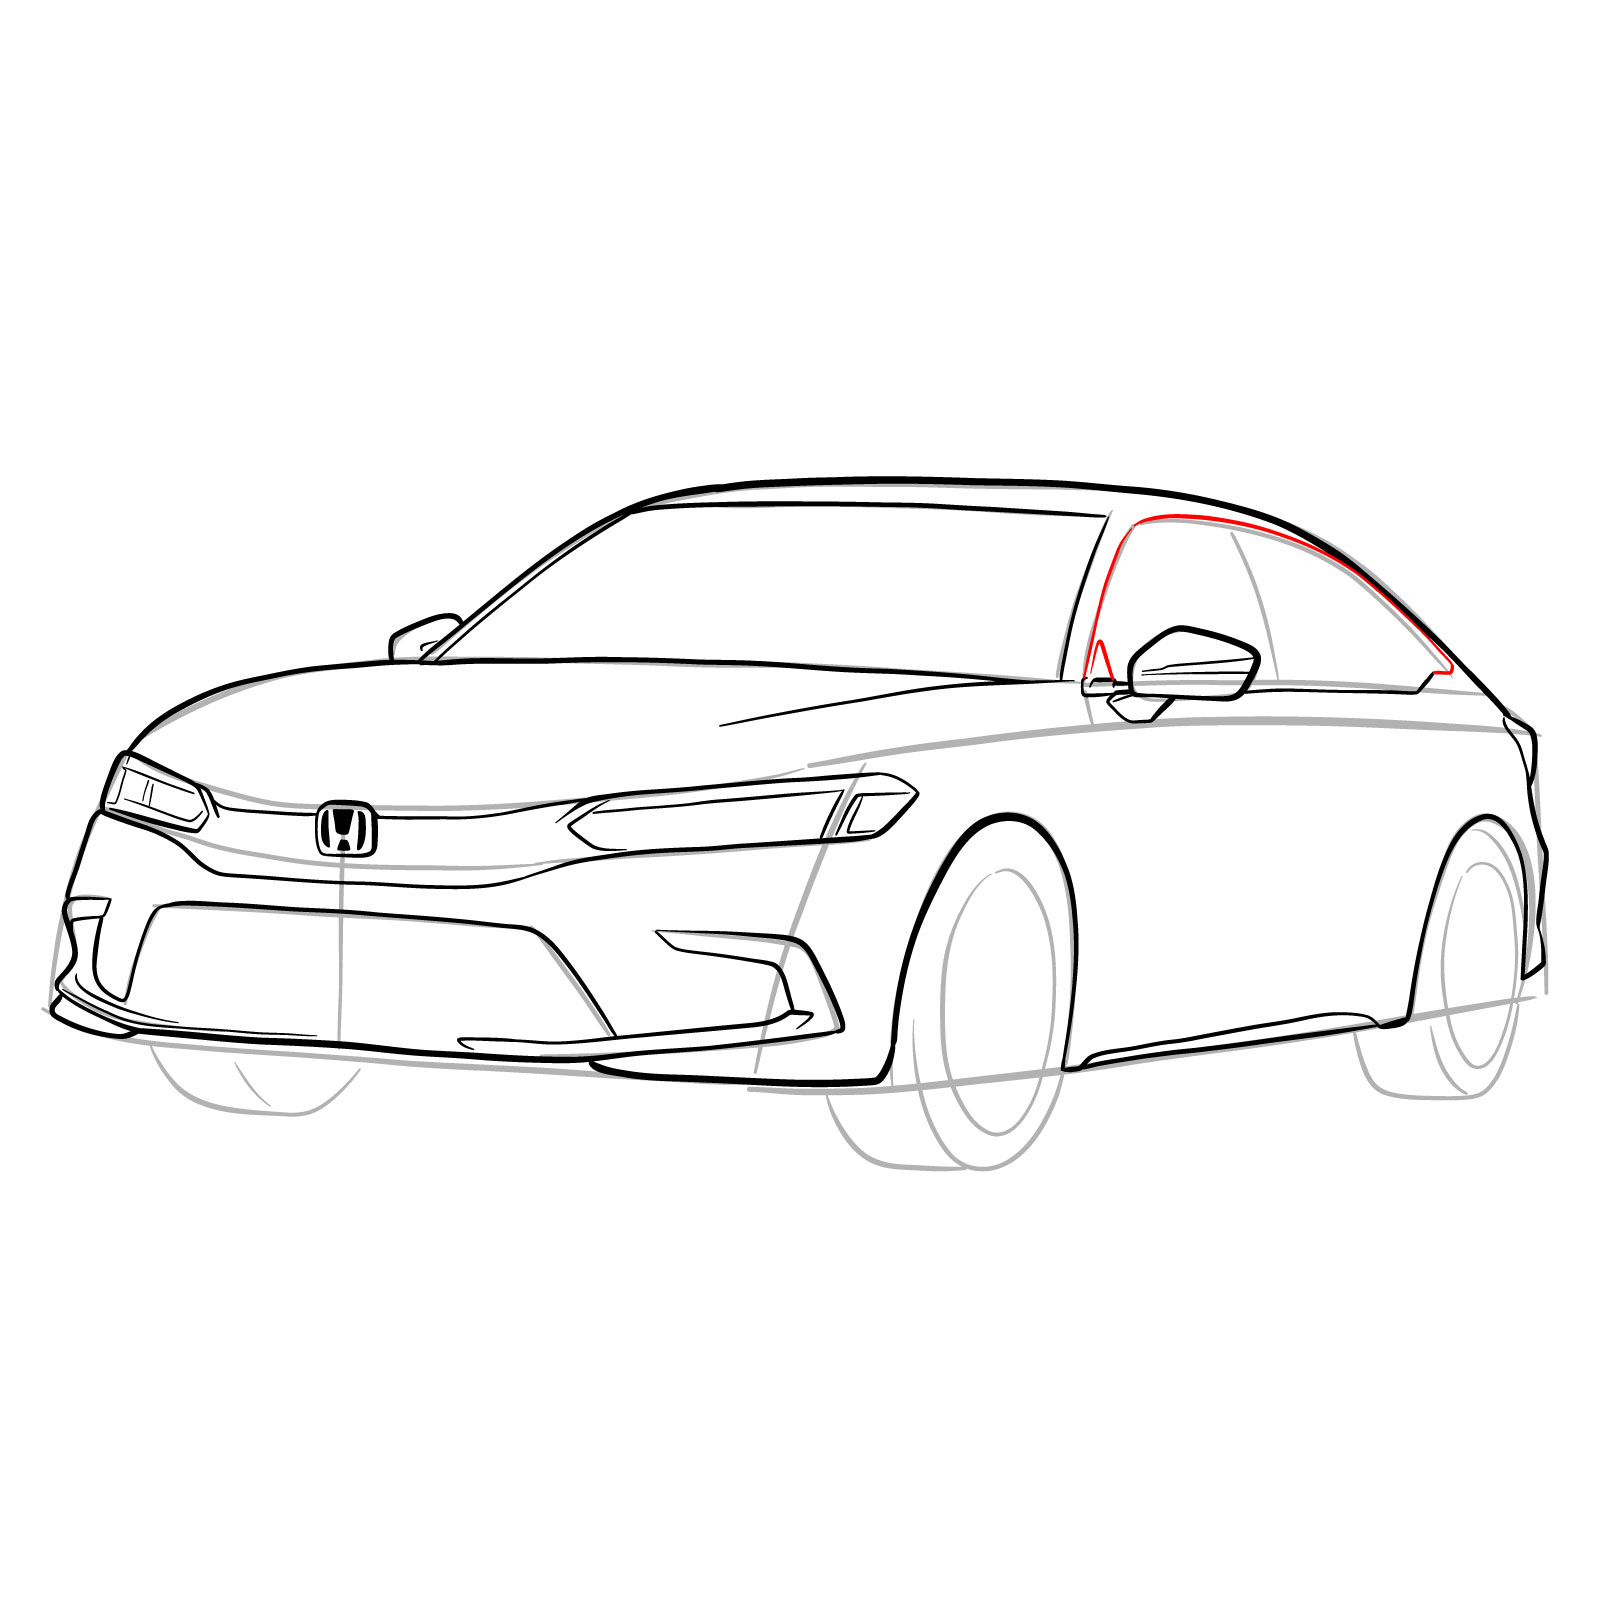 How to draw a 2022 Honda Civic - step 21